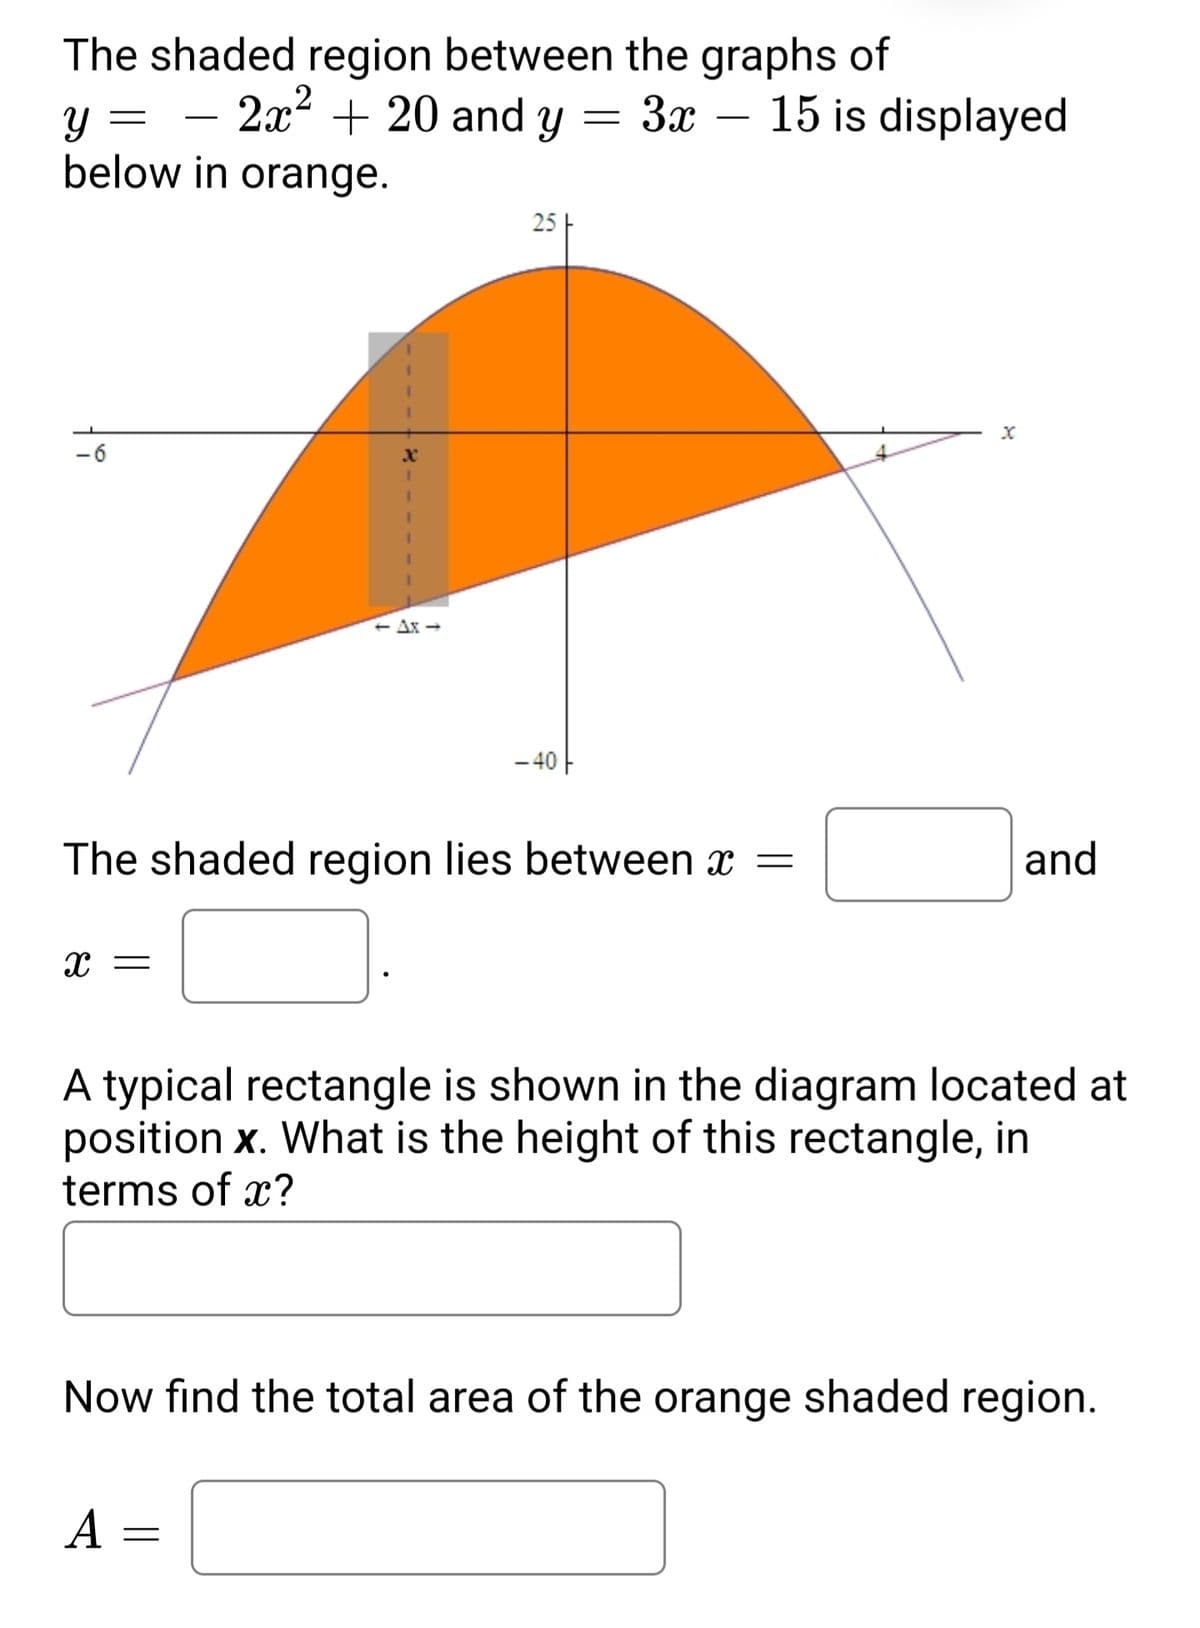 The shaded region between the graphs of
y = – y
below in orange.
2x + 20 and
3x – 15 is displayed
-
25
+ Ax -
- 40 -
The shaded region lies between x =
and
x =
A typical rectangle is shown in the diagram located at
position x. What is the height of this rectangle, in
terms of x?
Now find the total area of the orange shaded region.
А —
